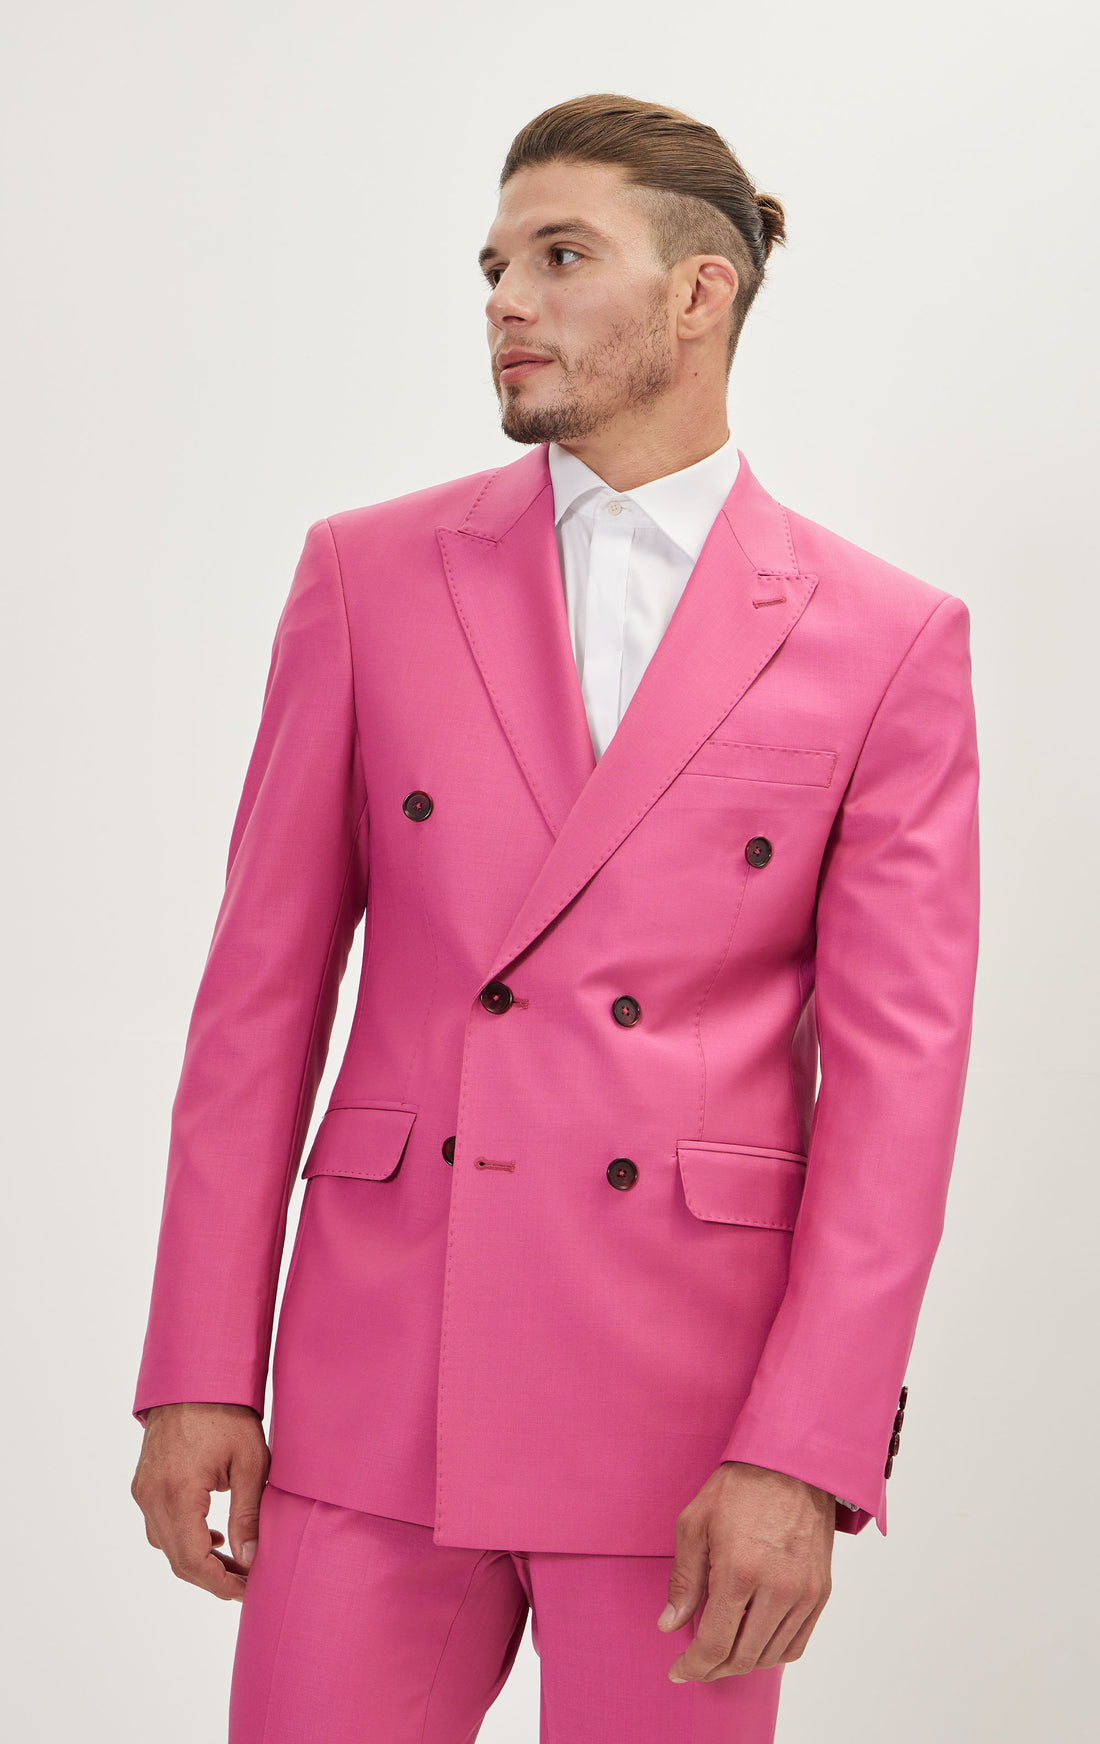 N° R206 SUPER 120S MERINO WOOL DOUBLE BREASTED SUIT - RASPBERRY PINK ISH RED